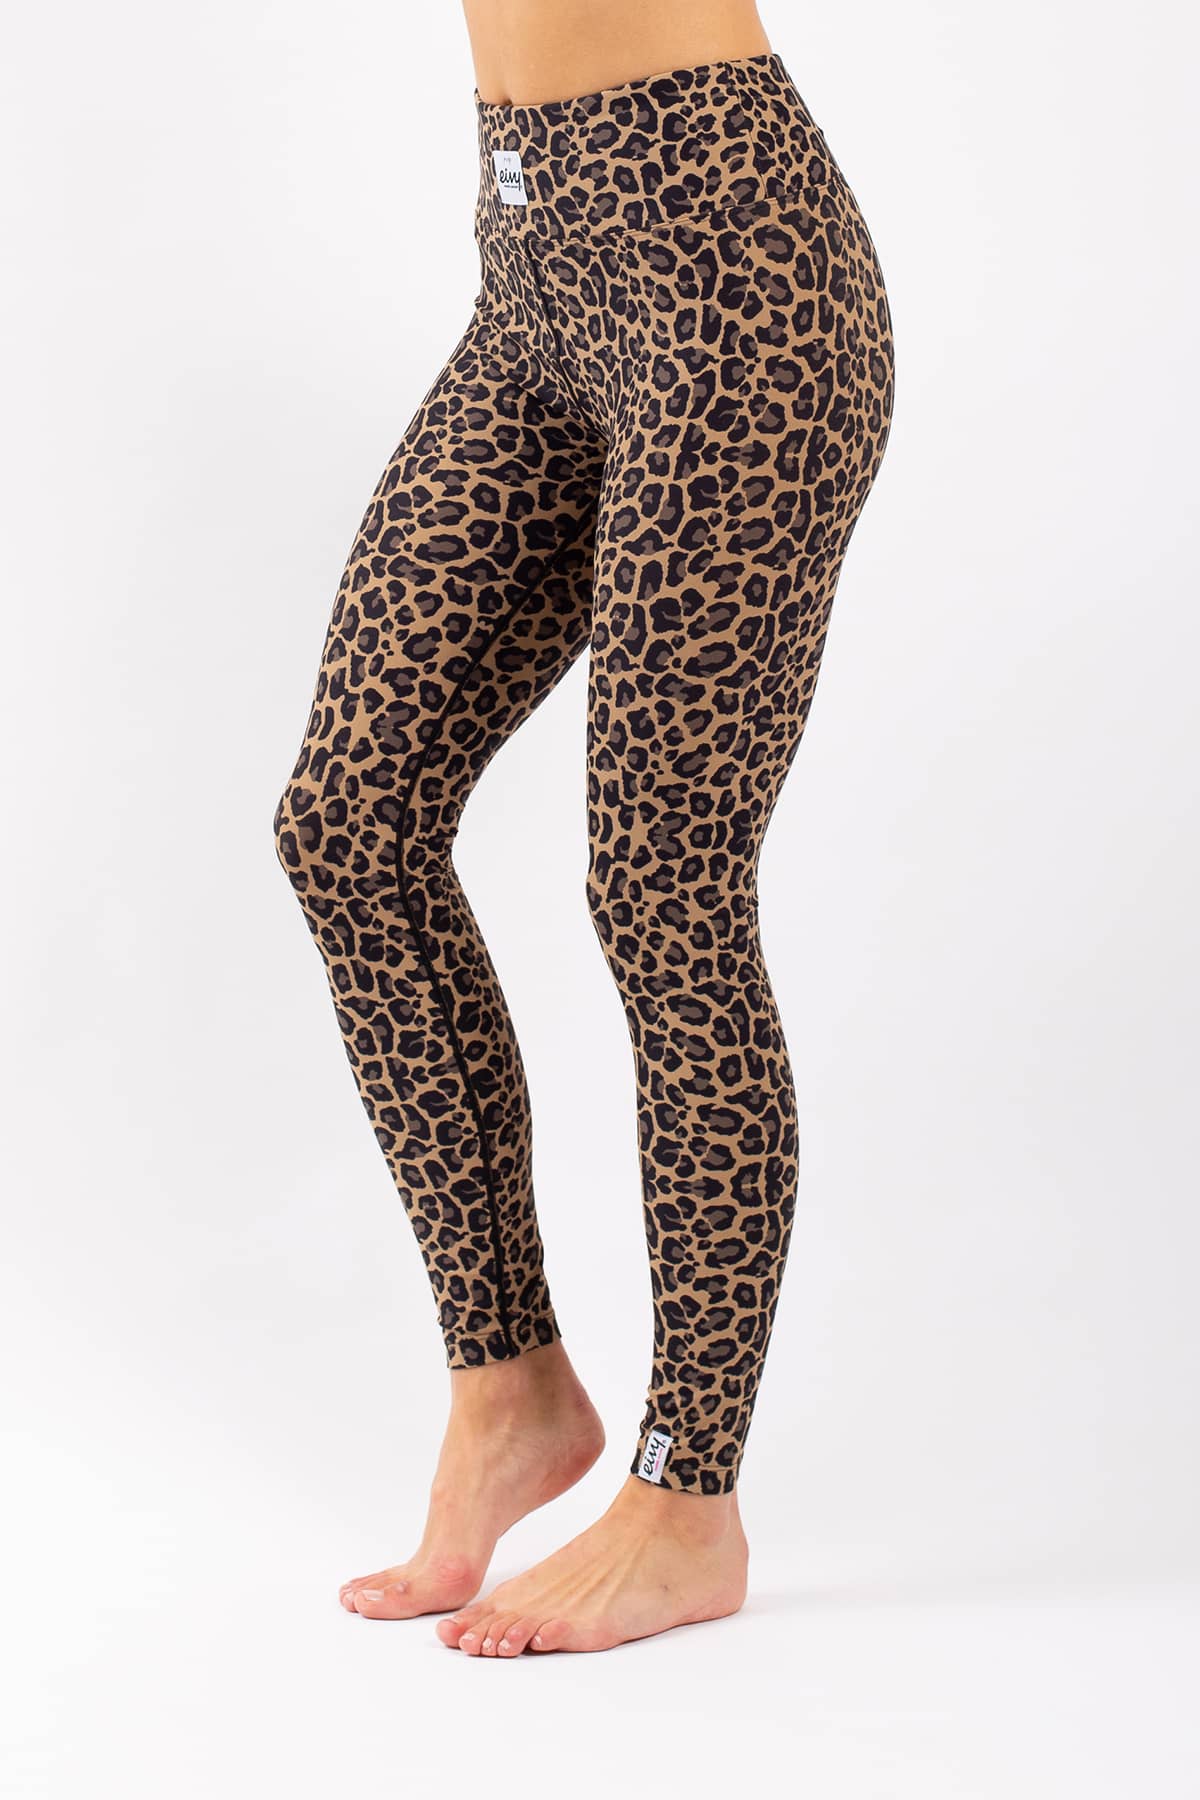 Eivy Icecold Tights Leggings leopard XL